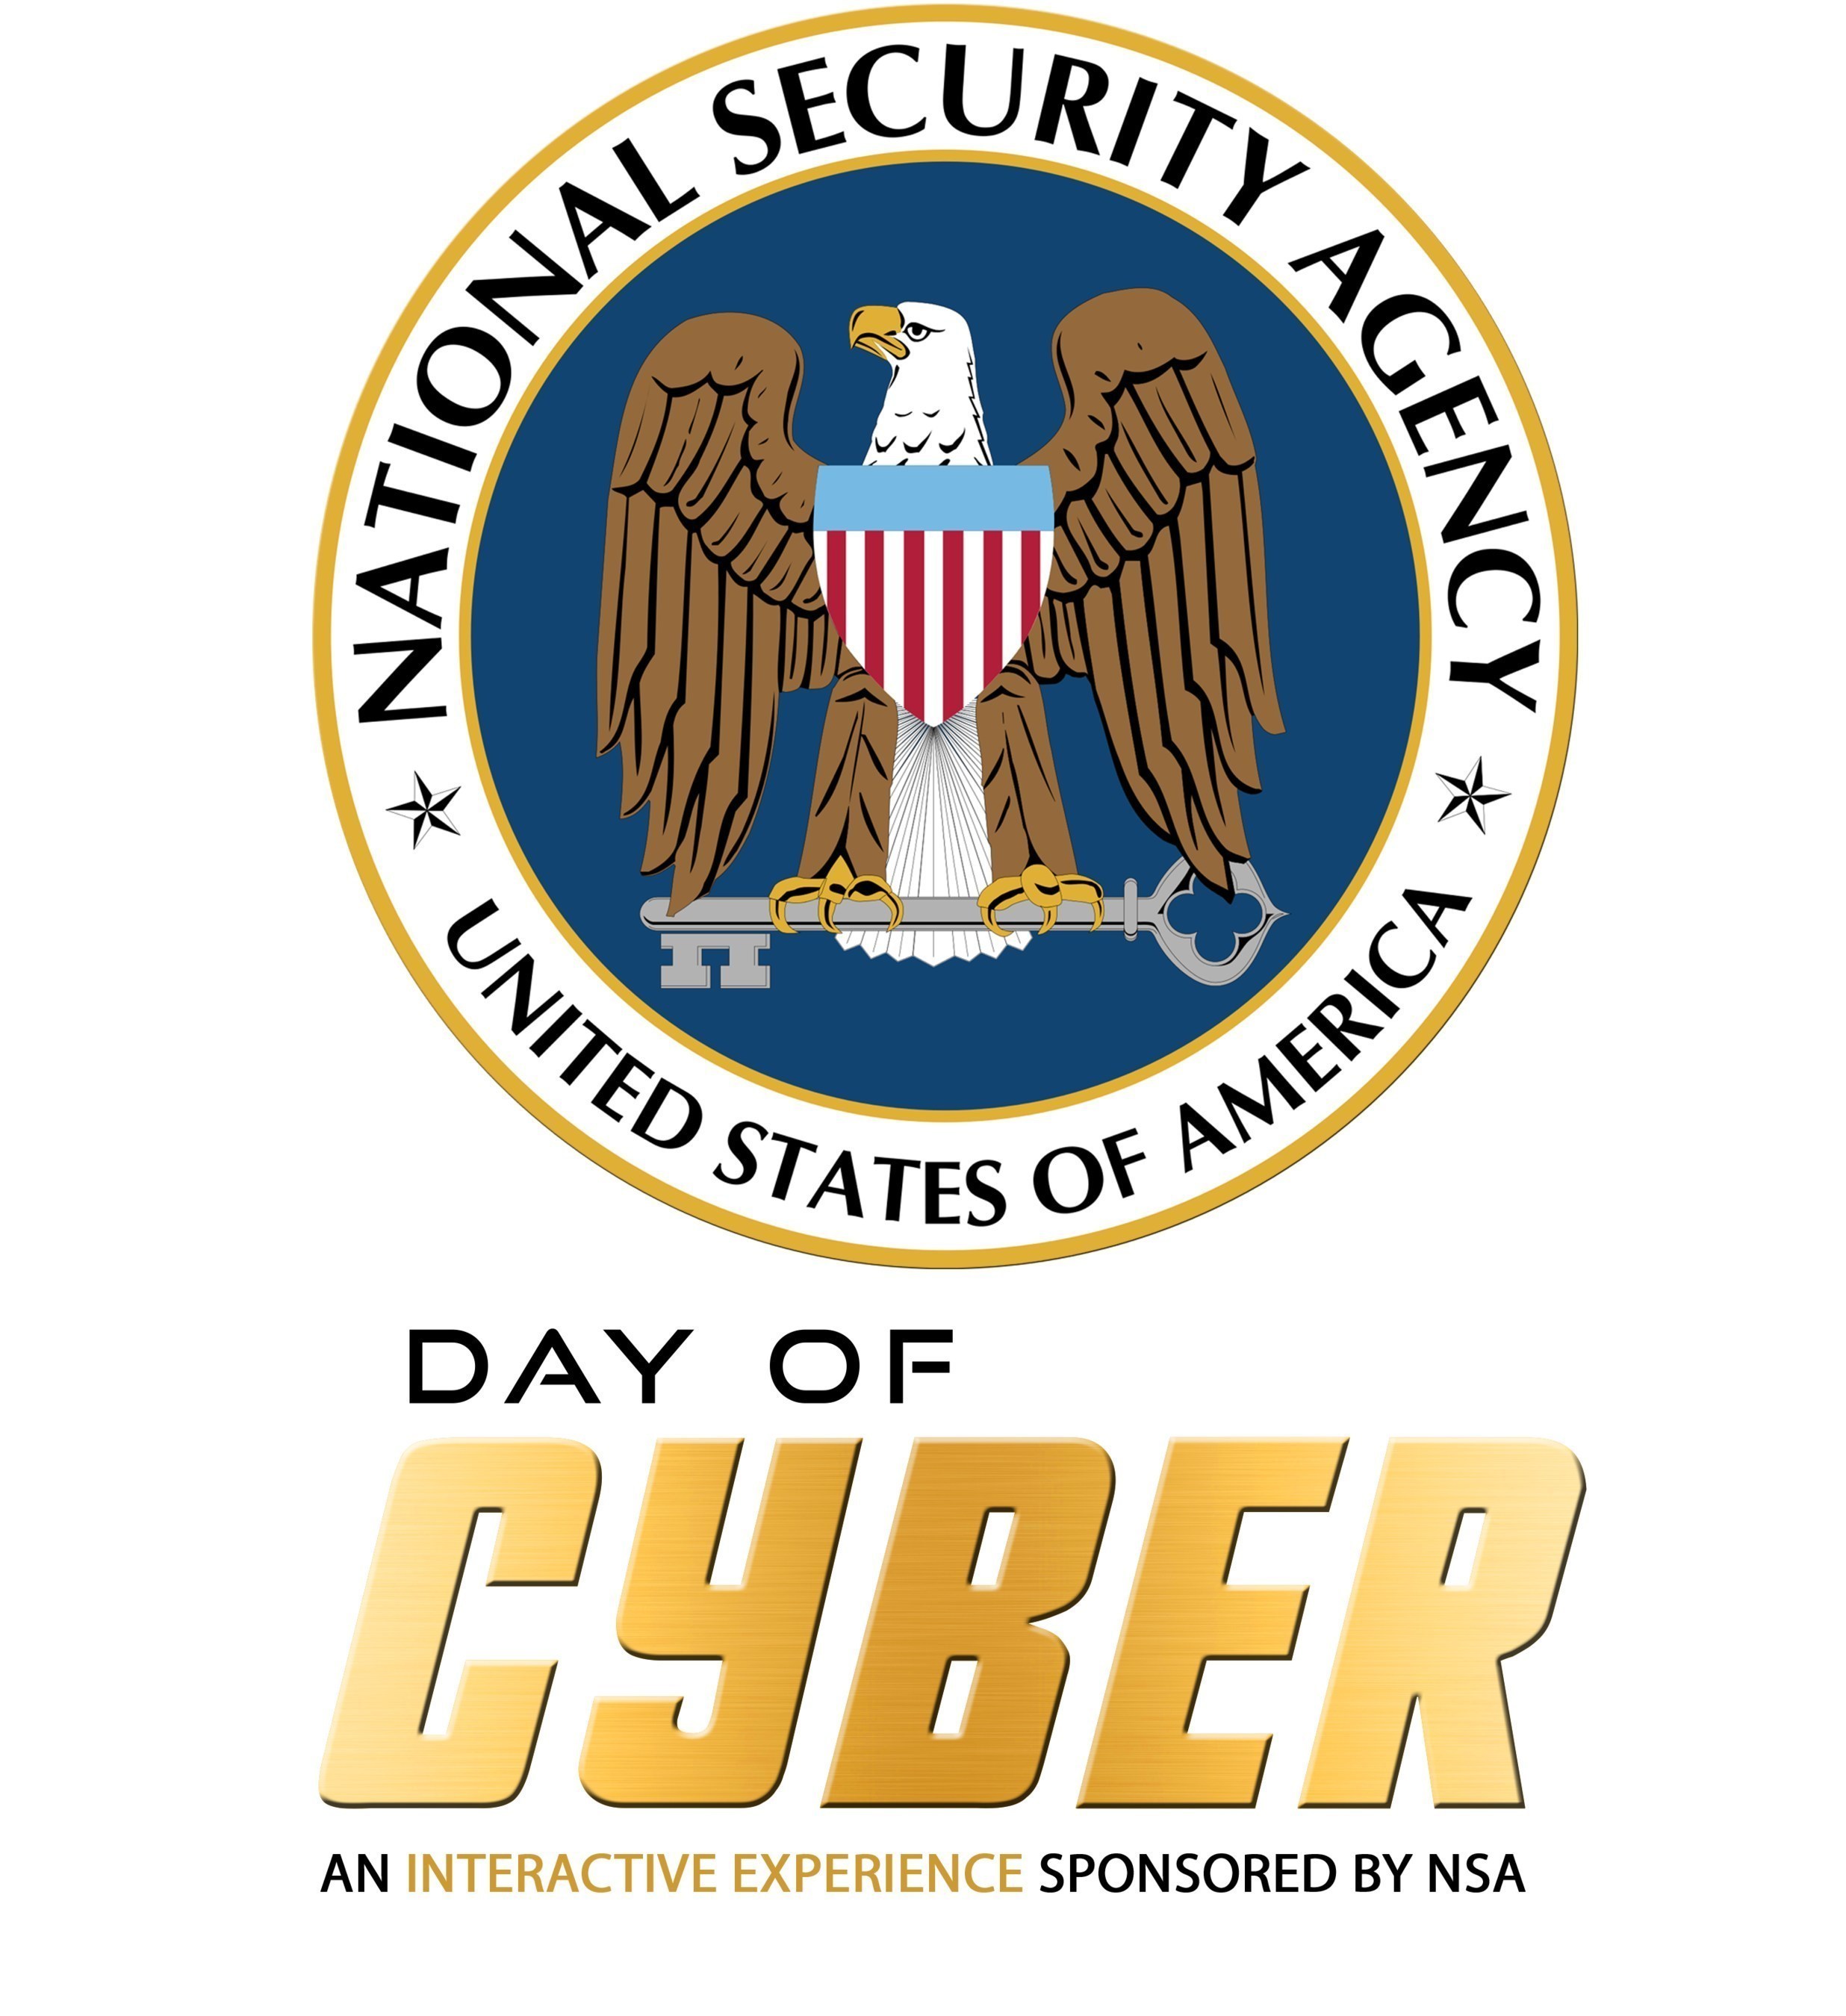 NSA Day of Cyber